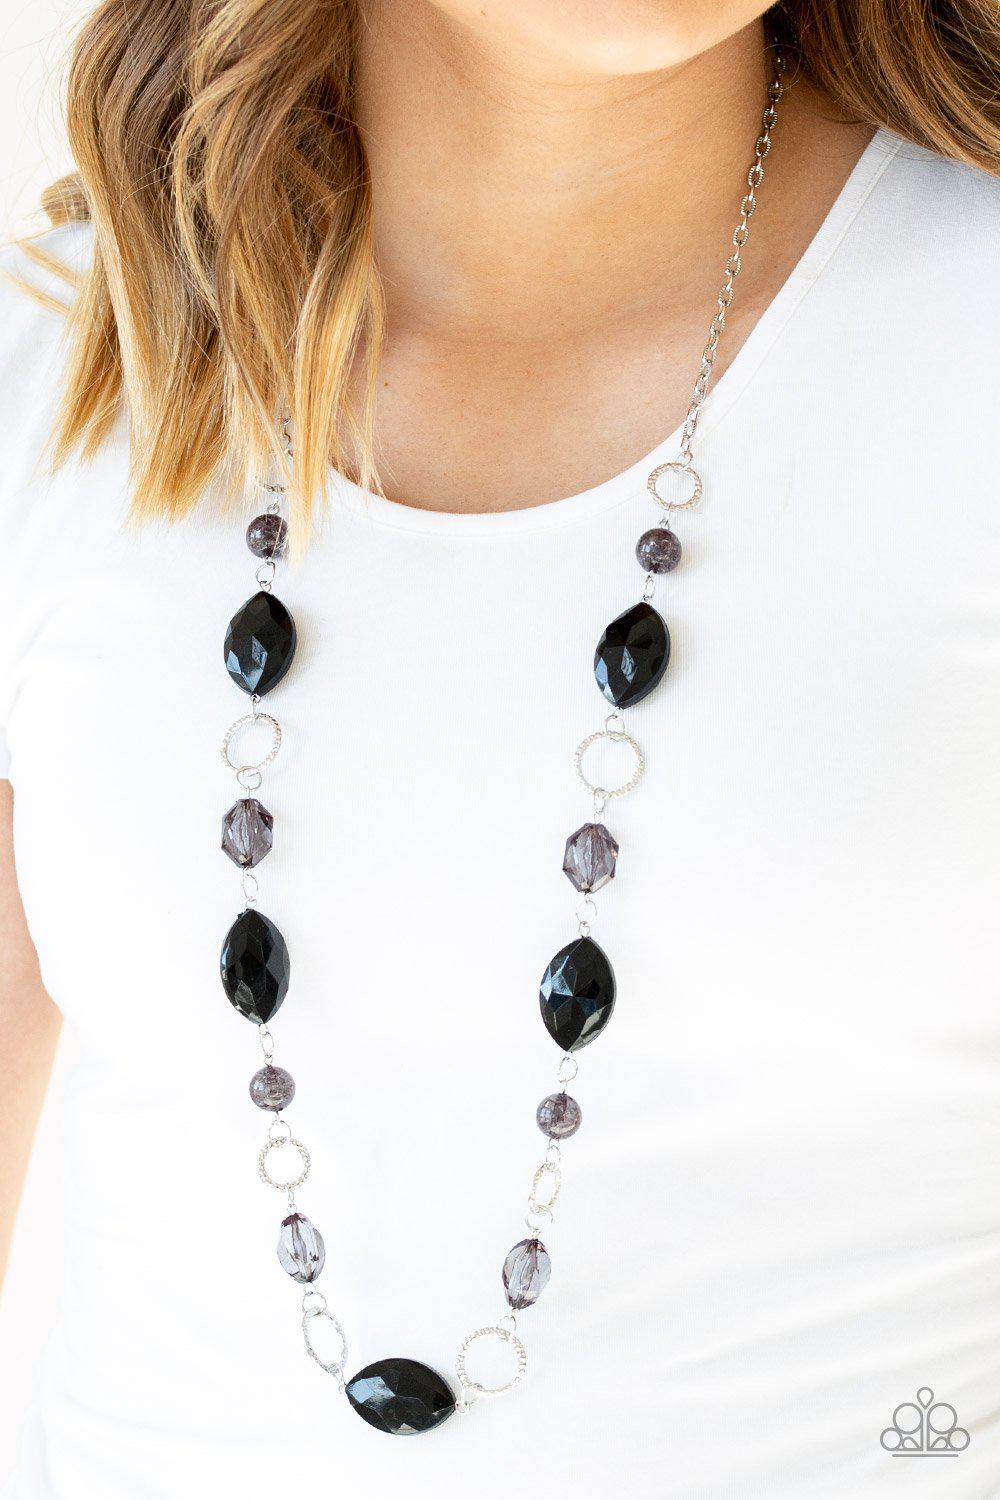 Shimmer Simmer Black Necklace - Paparazzi Accessories - model -CarasShop.com - $5 Jewelry by Cara Jewels